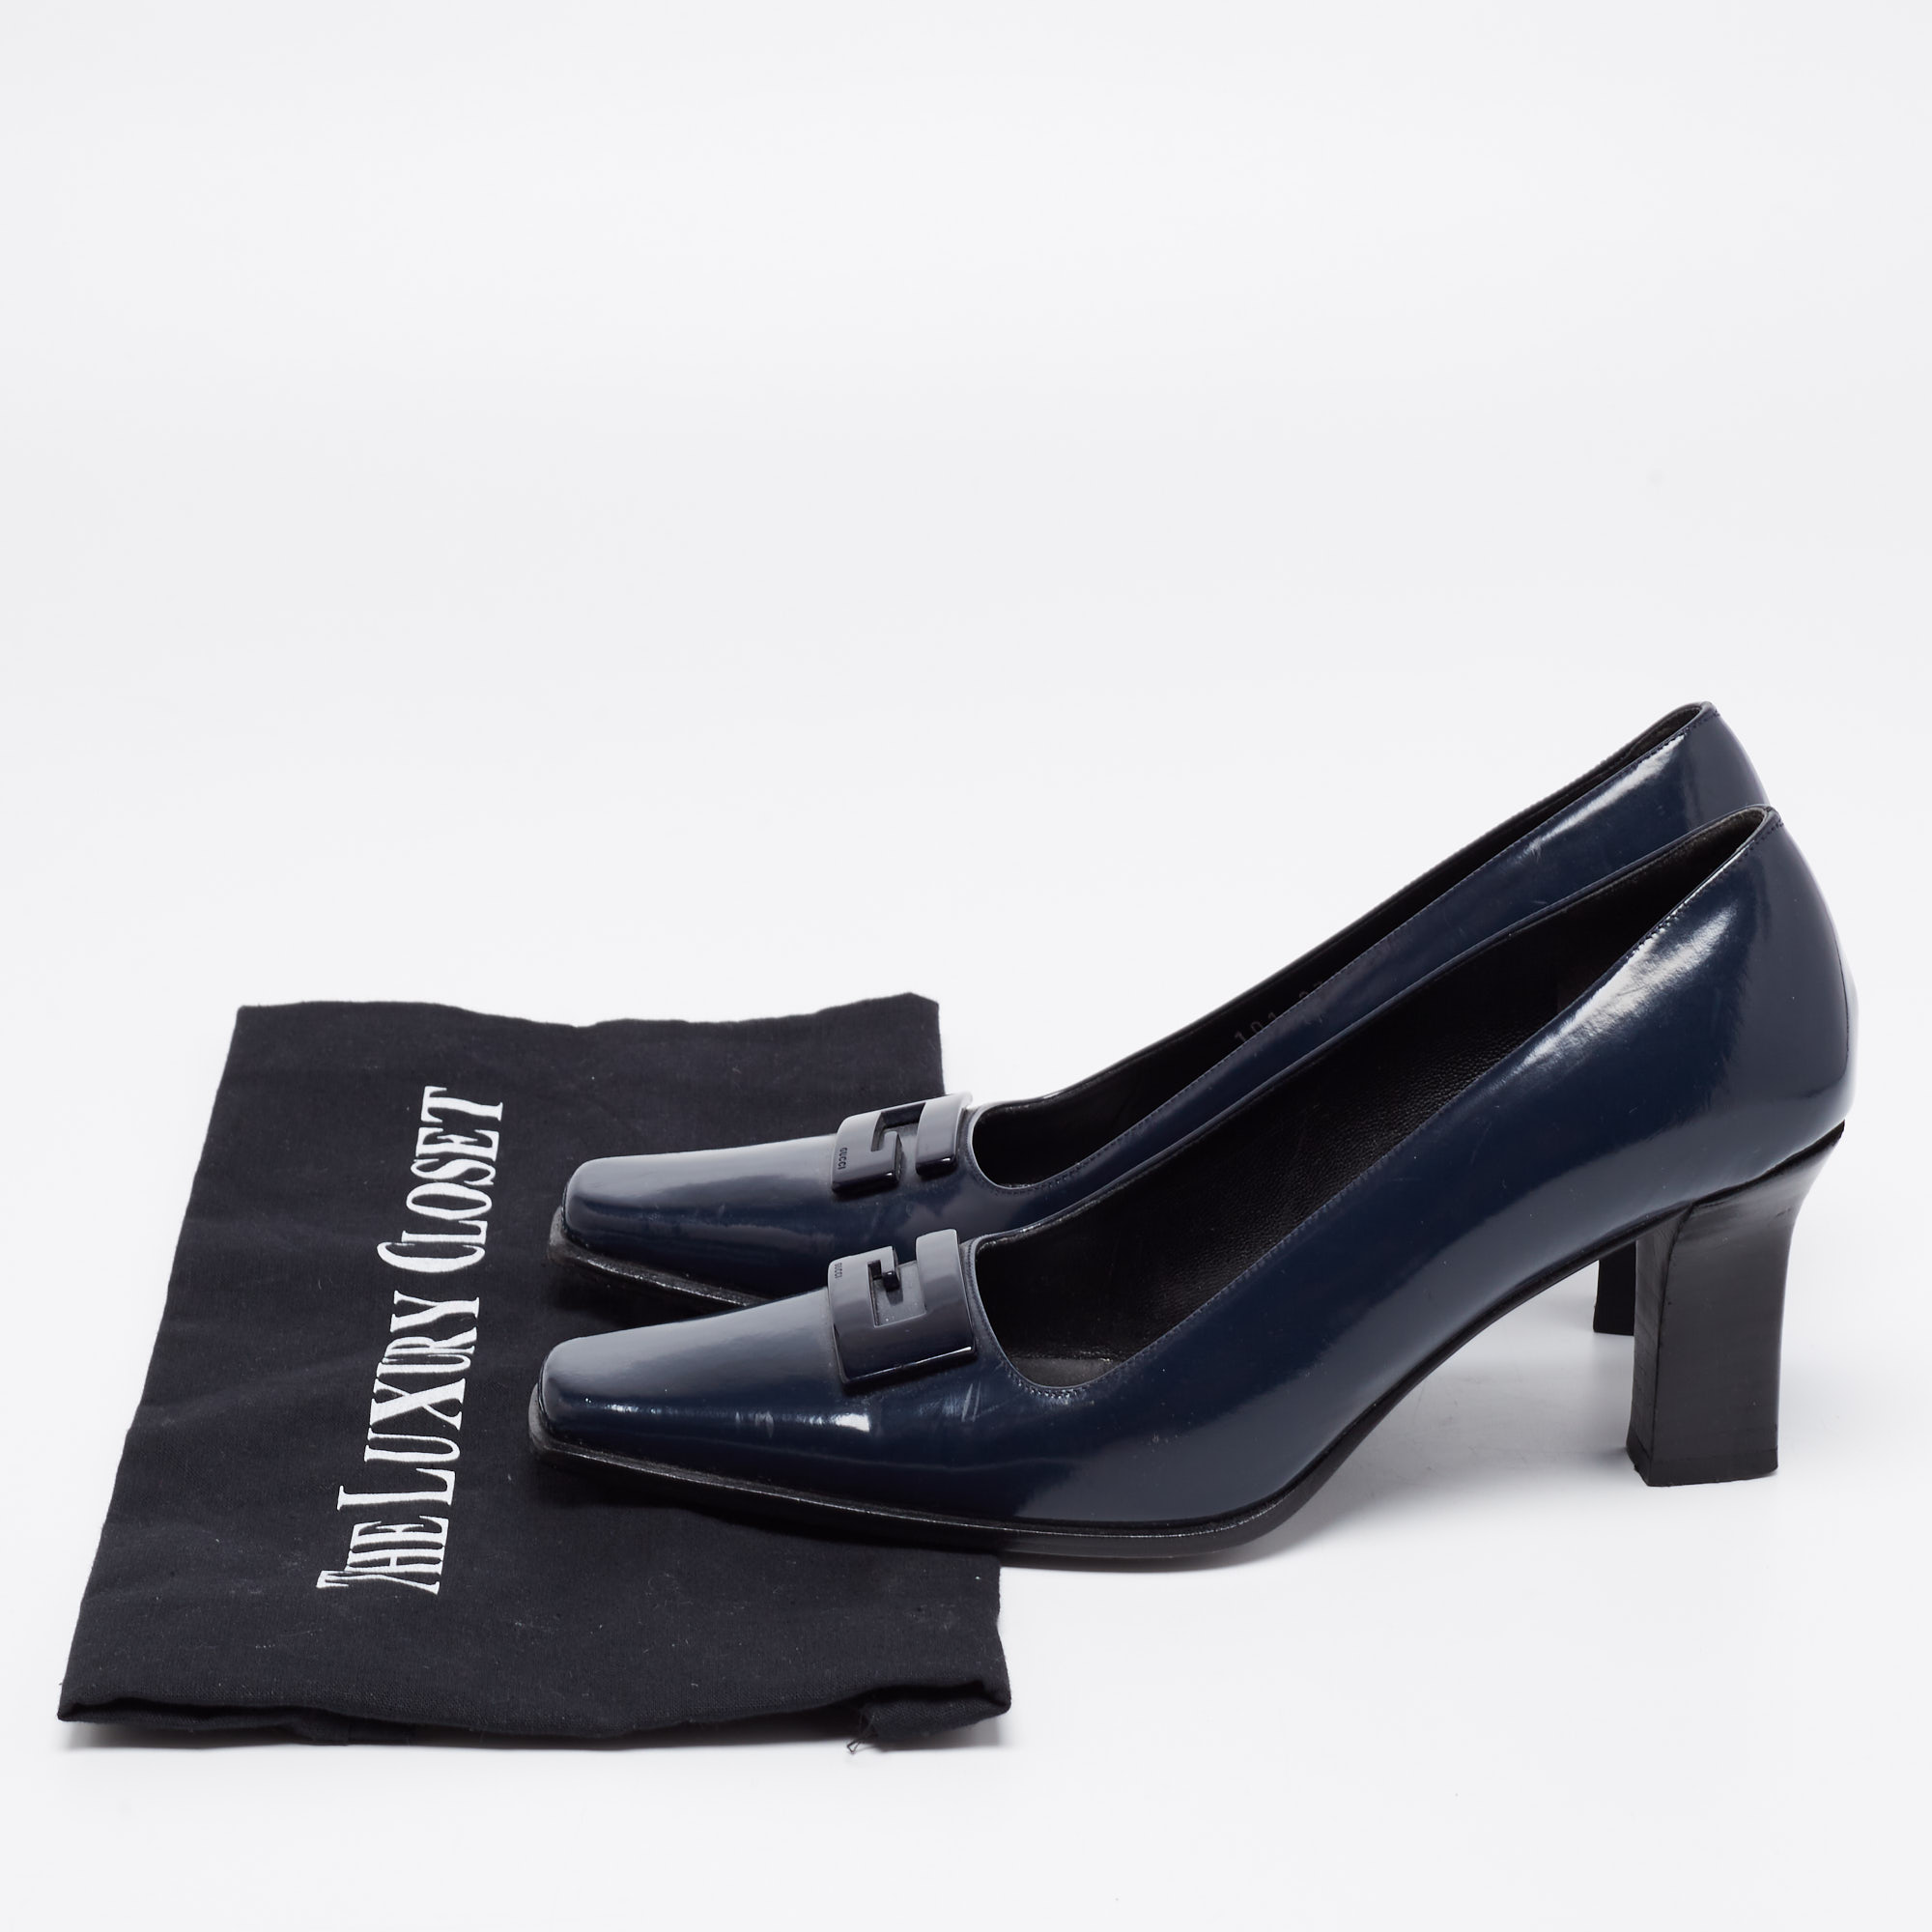 Gucci Midnight Blue Patent Leather Square-Toe Pumps Size 36.5